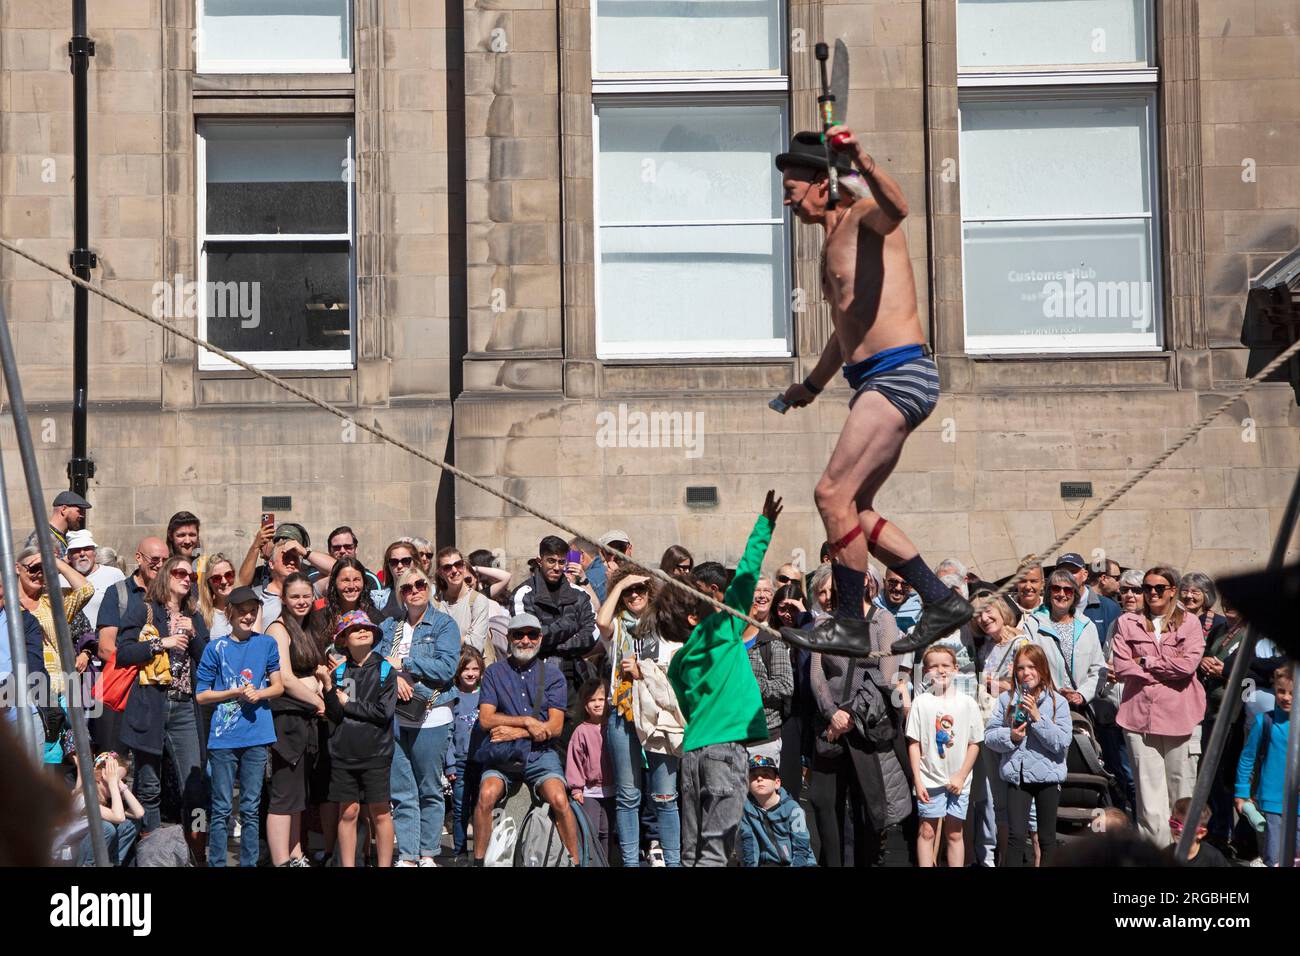 Royal Mile, Edinburgh, Scotland, UK. Busy day at Edinburgh Fringe Festival, large audiences stopping to watch and be entertained by Street Performers on the High Street, helped by the sunshine and warmer weather. Pictured: Kwabana Lindsay Street Performer tease a youn boy with a fiver for assisting him. Credit: Archwhite/alamy live news. Stock Photo